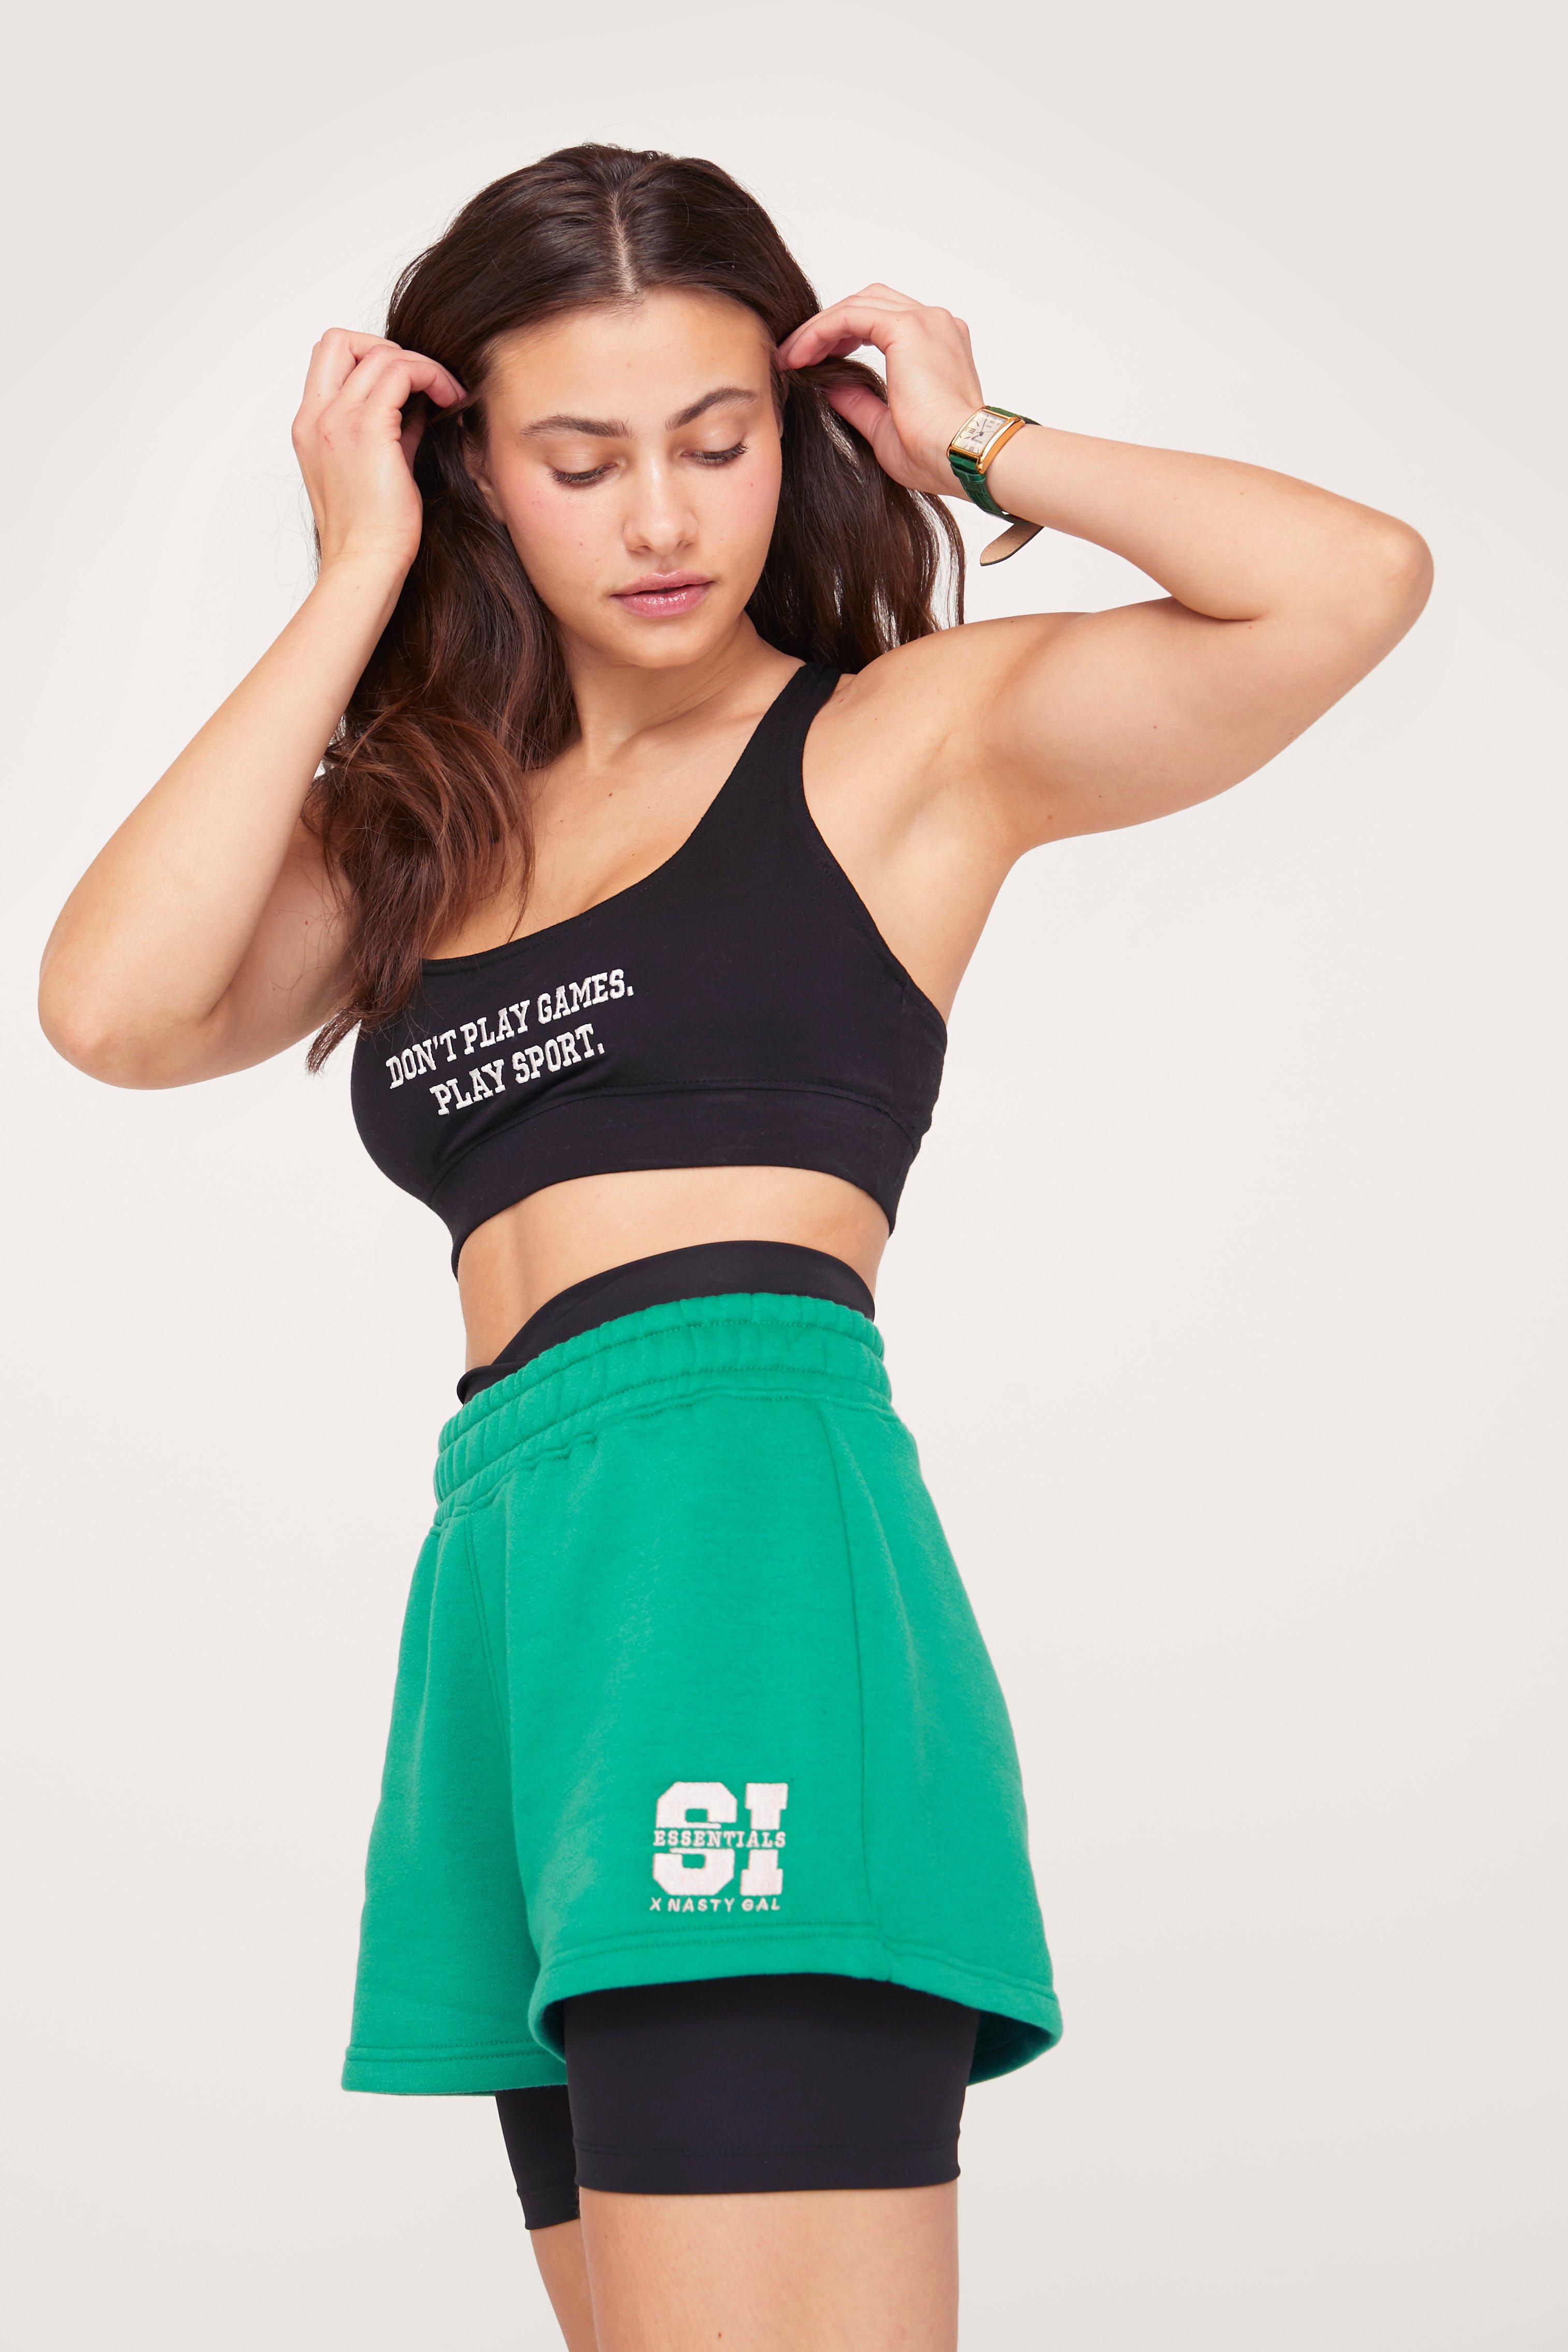 Don't Play Games Play Sport Graphic Bralette